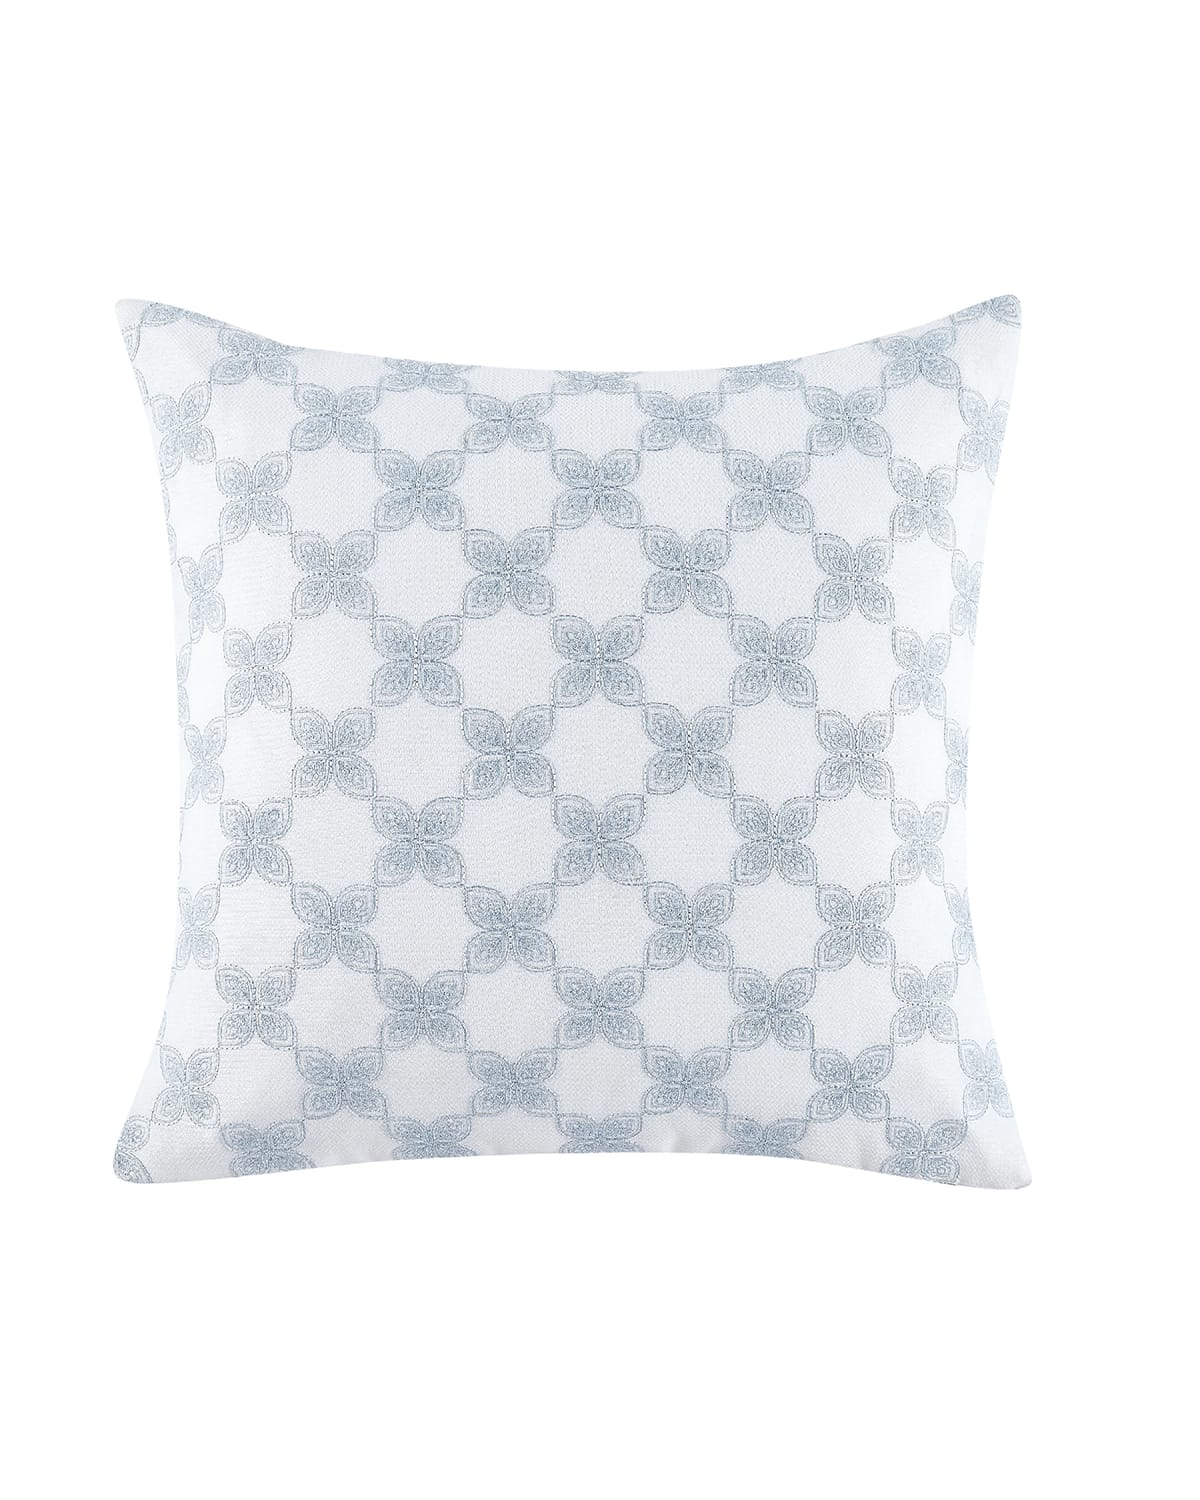 Shop Charisma Cellini Embroidered Floral Geo Pillow In White And Blue